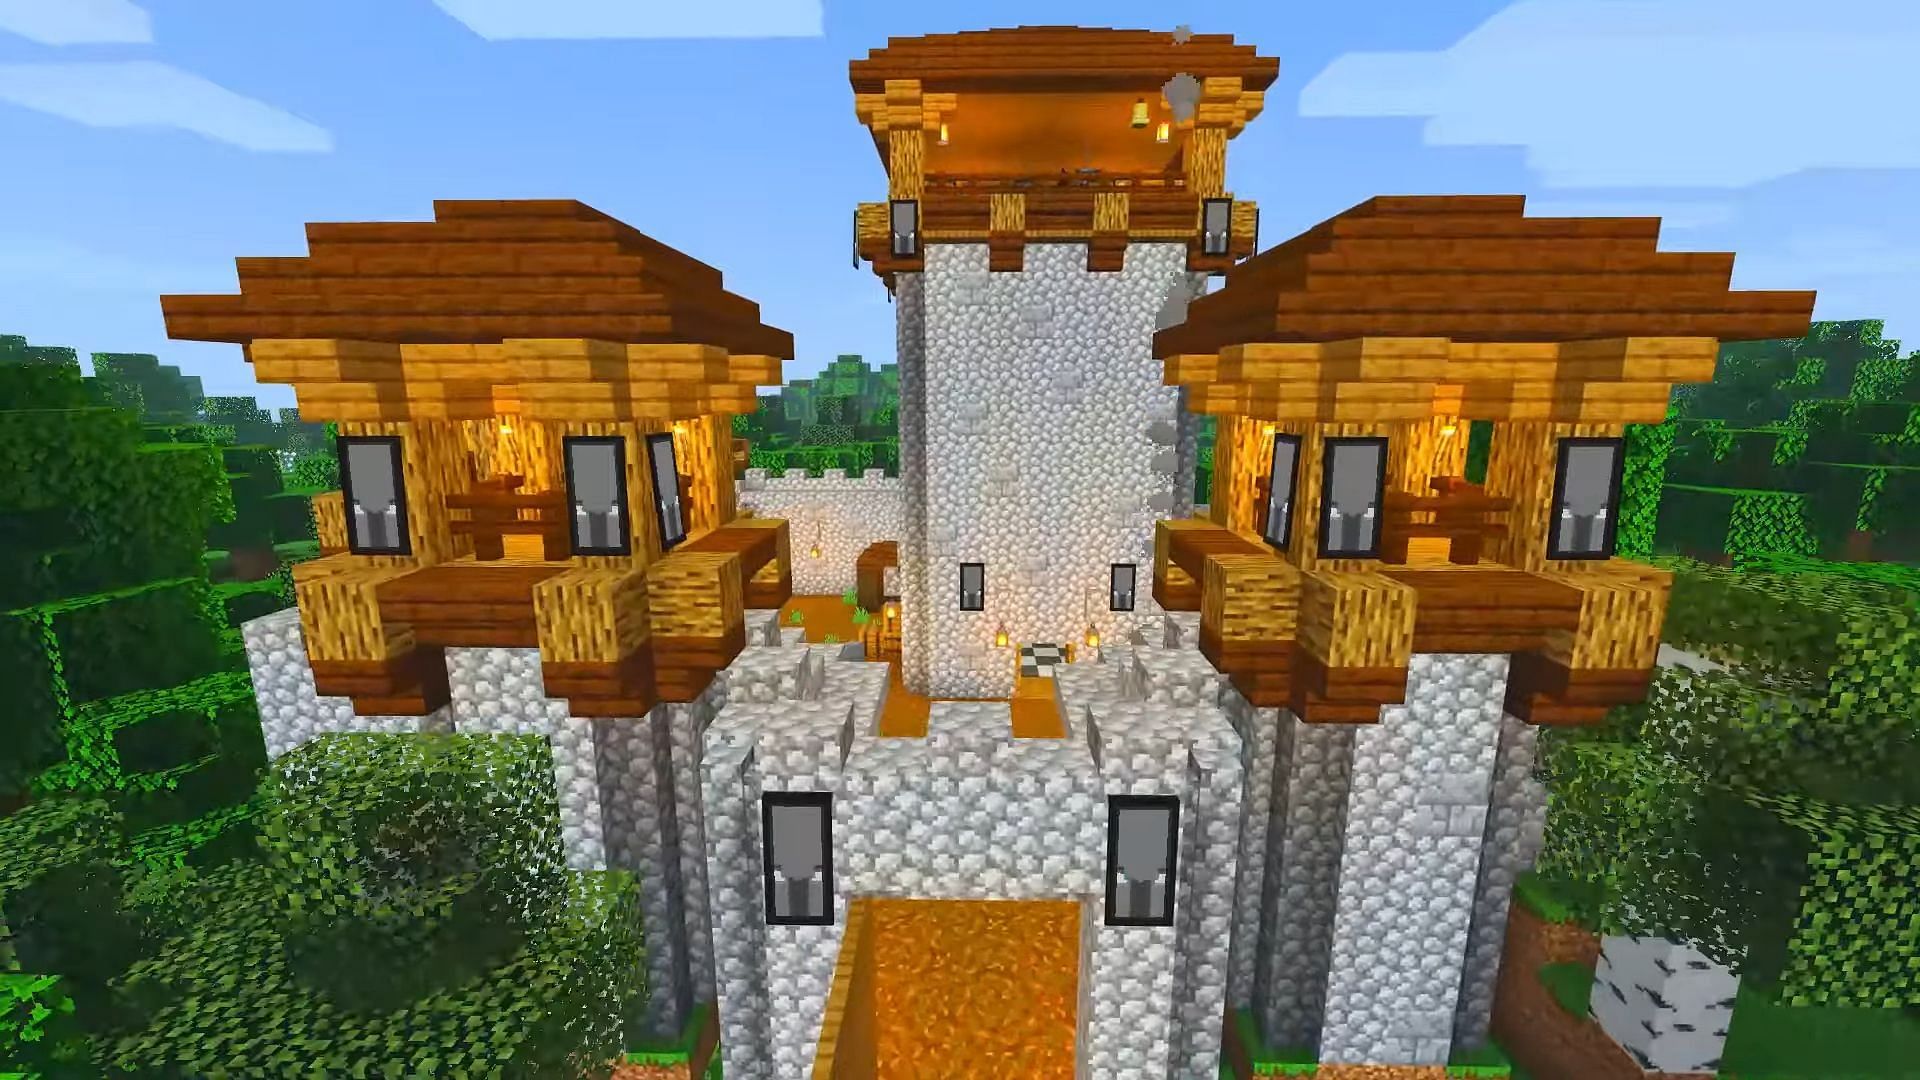 More Simple Structures adds a ton of new locations to explore in the world of Minecraft (Image via iKorbon/MCPEDL)